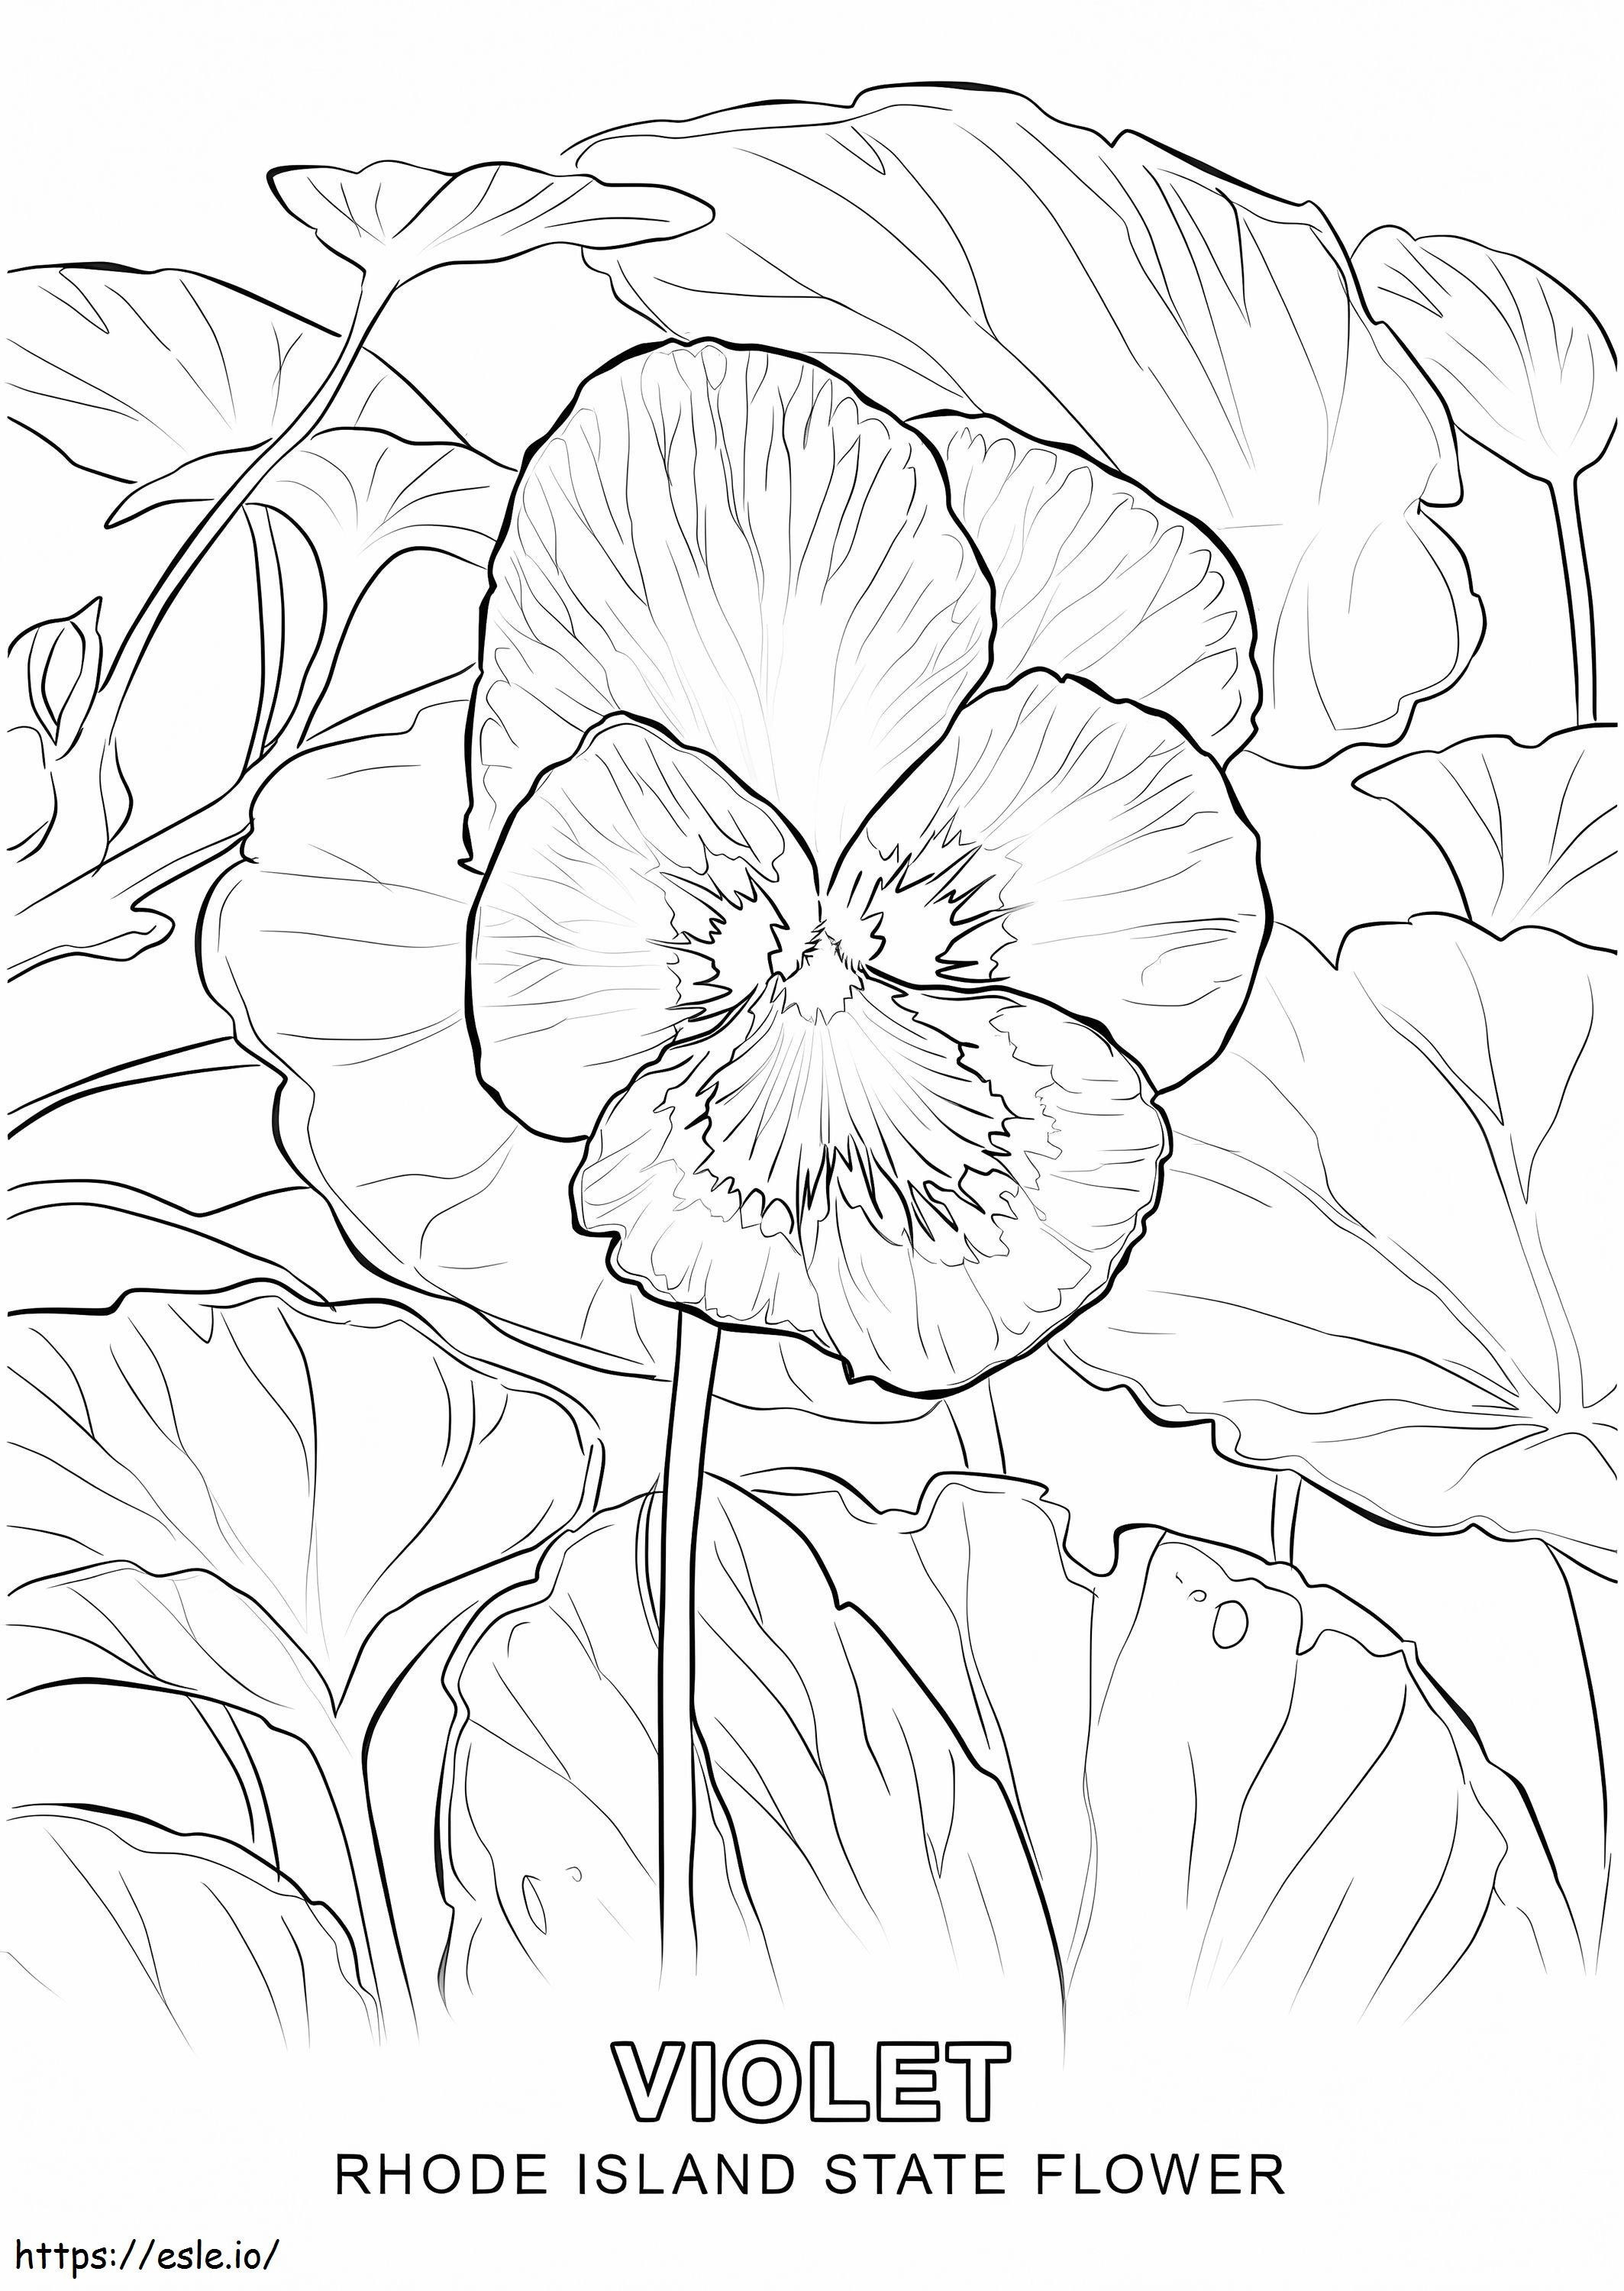 Rhode Island Flower coloring page